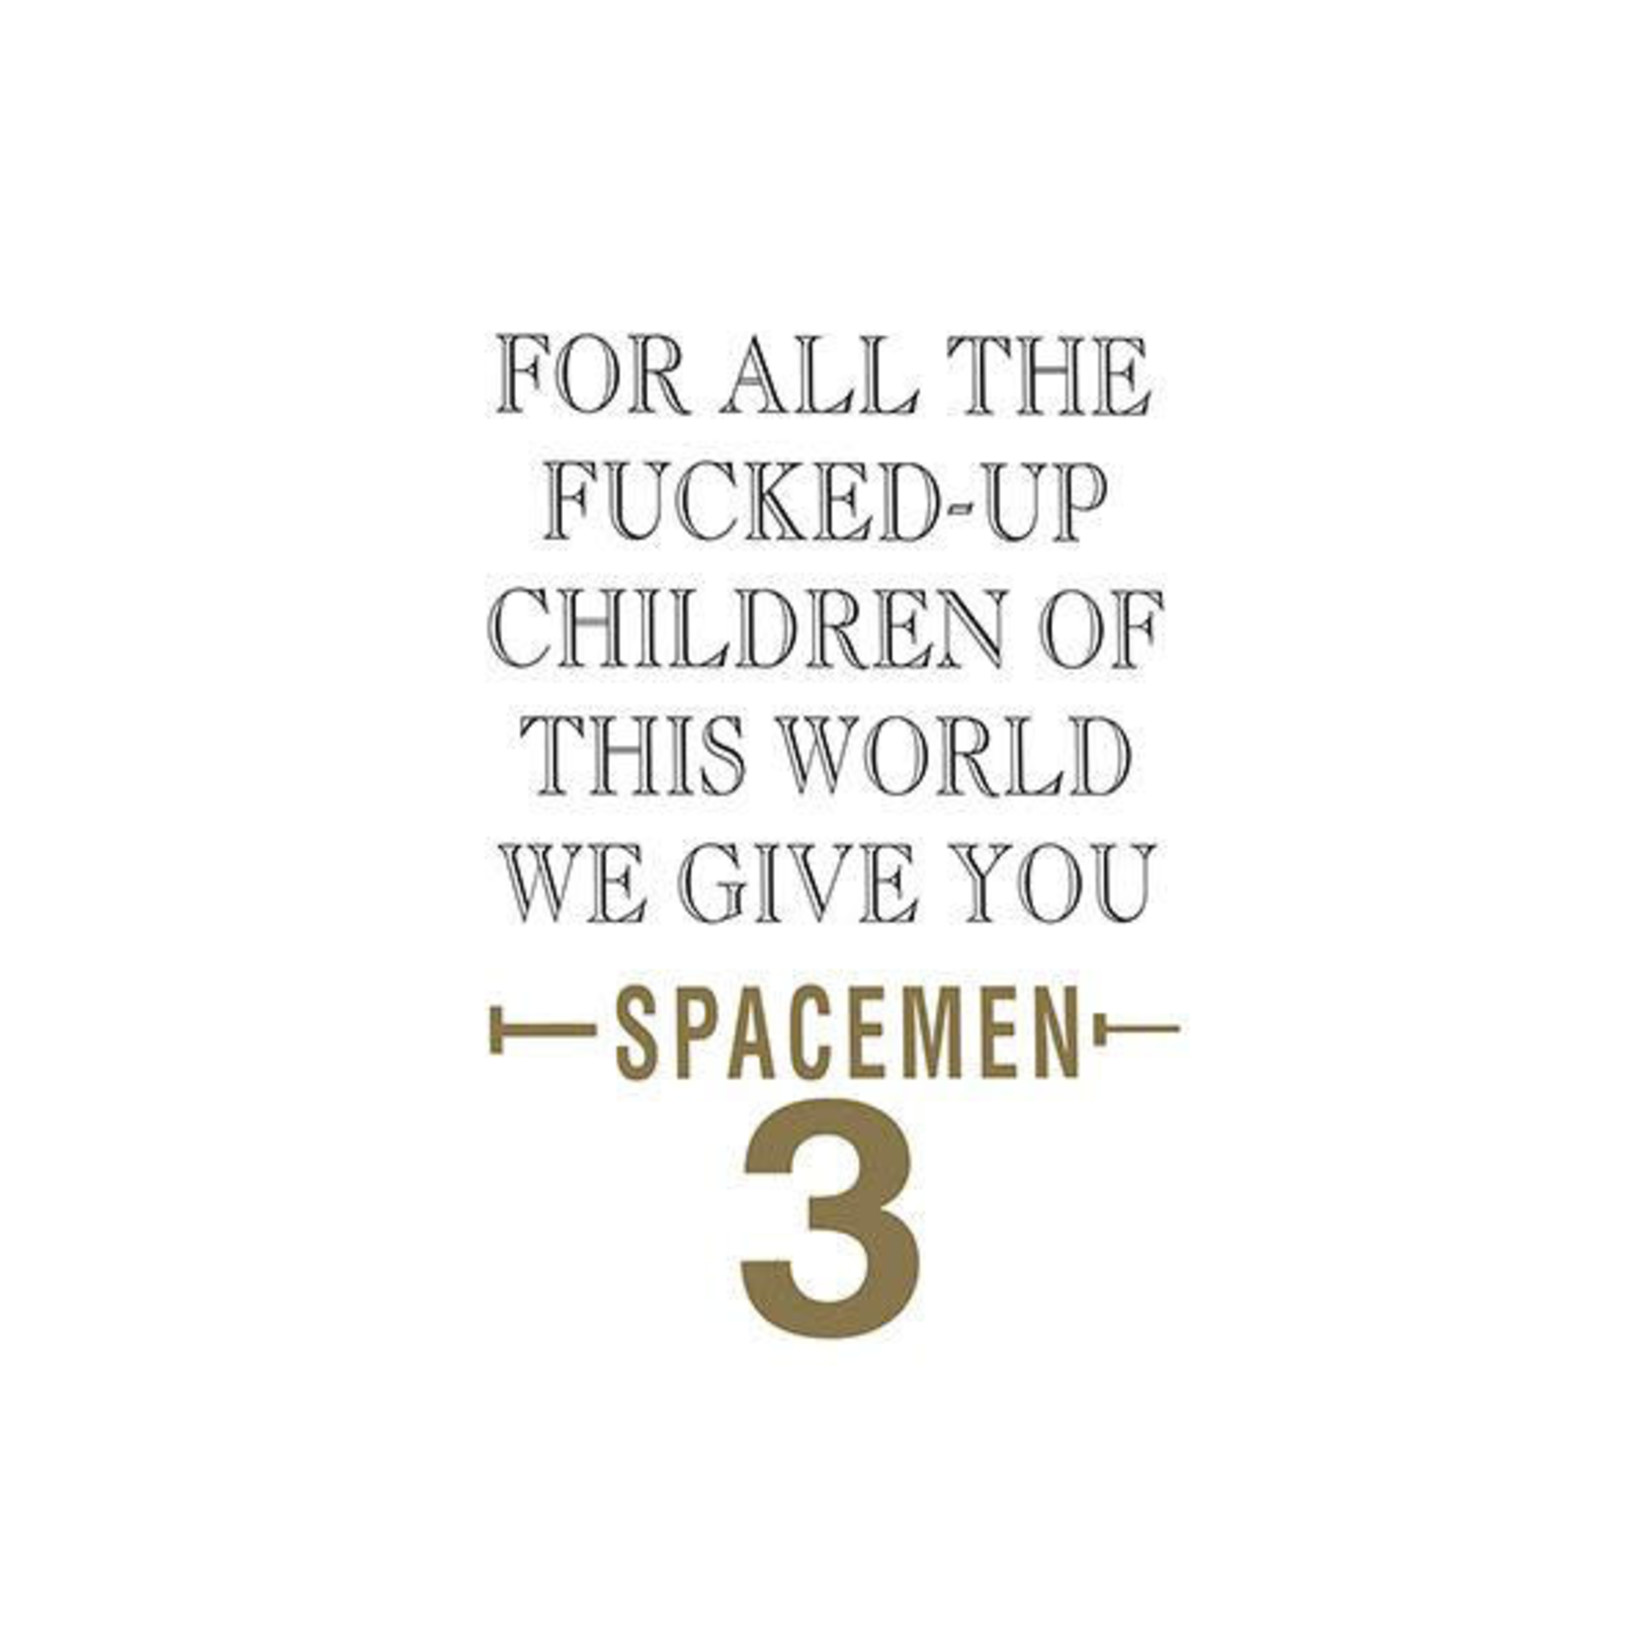 Superior Viaduct Spacemen 3 - For All The Fucked-Up Children Of This World We Give You Spacemen 3 (LP)